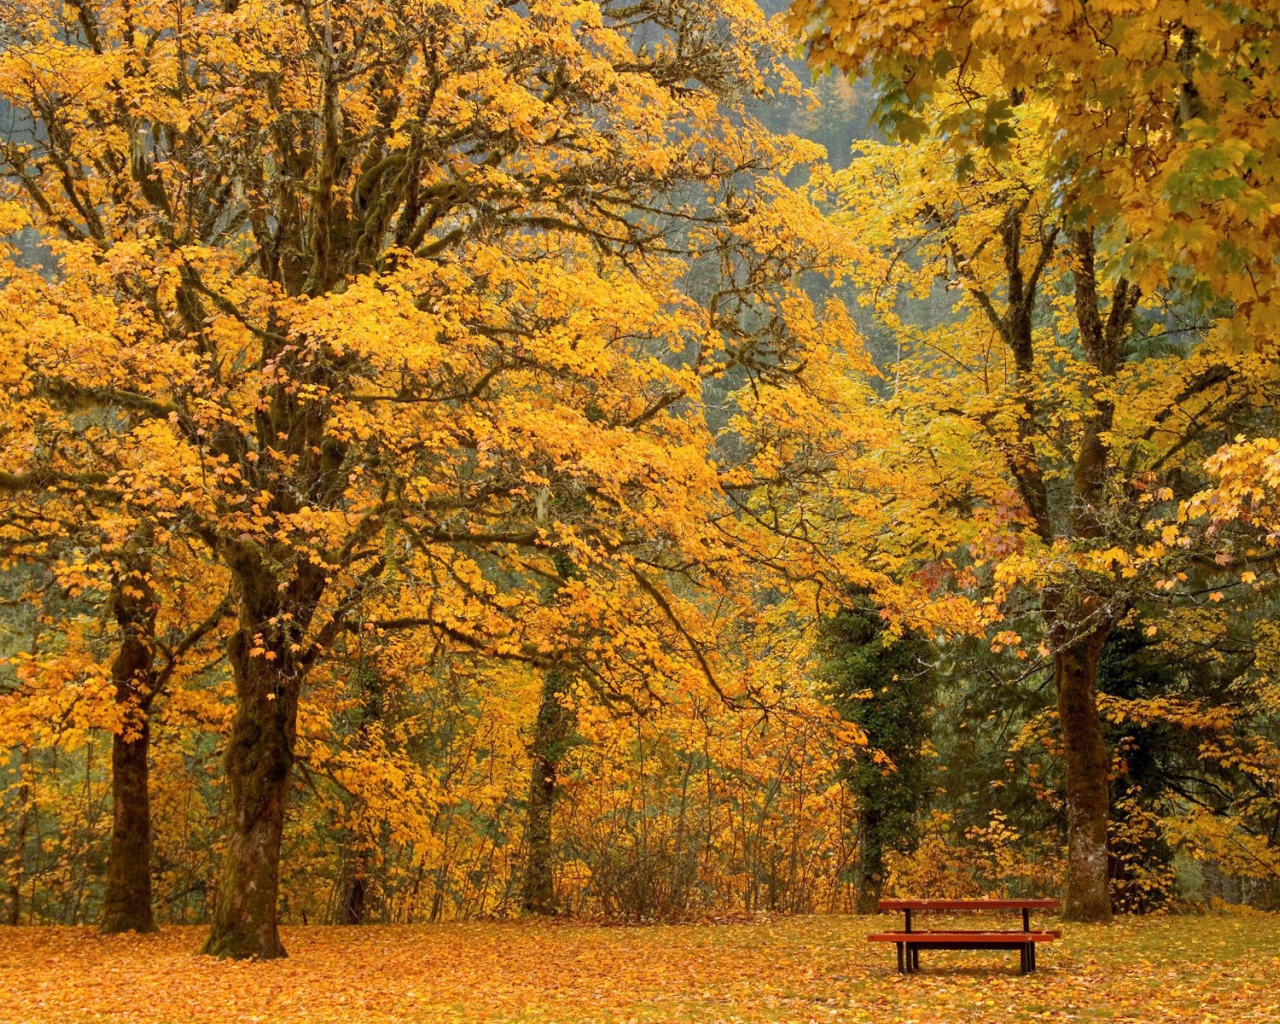 Bench under a yellow trees